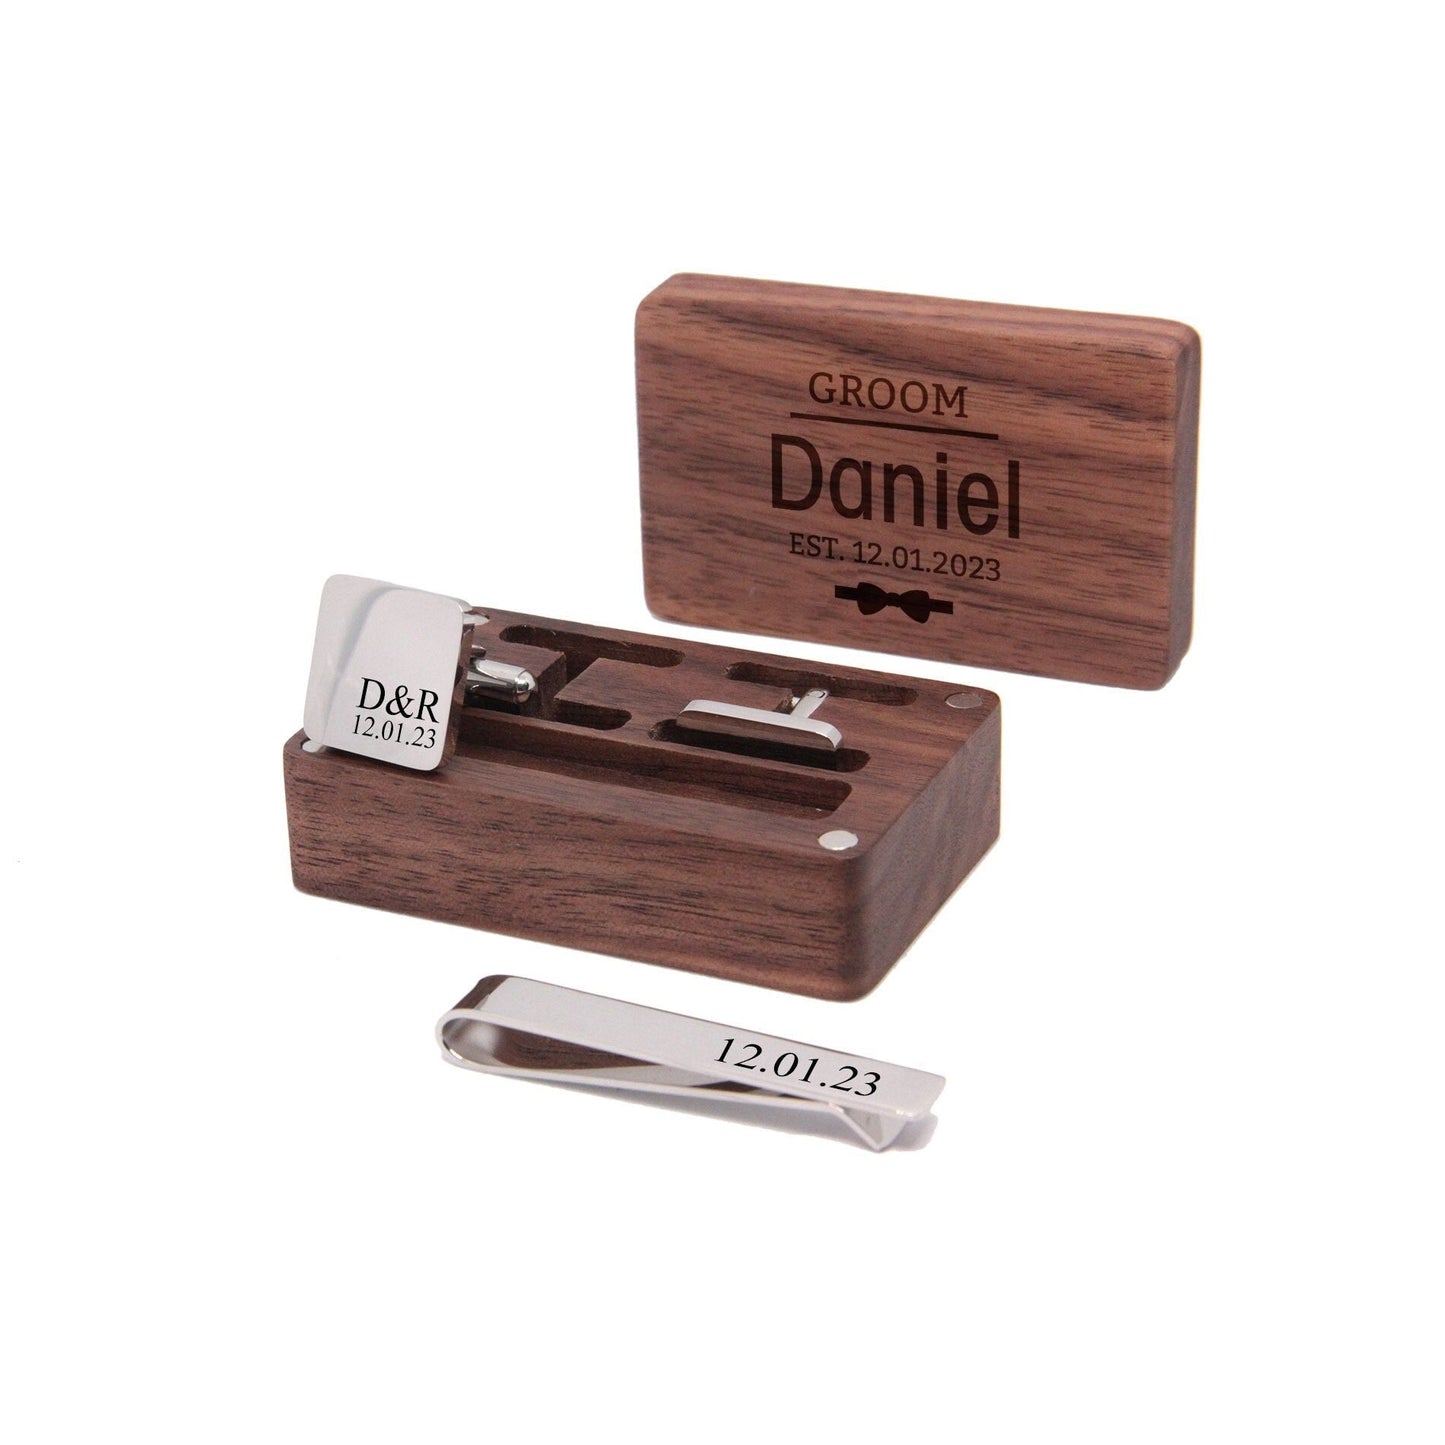 Personalised engraved stainless steel mens square cufflinks with tie pin & box | groom groomsman best man father husband wedding birthday